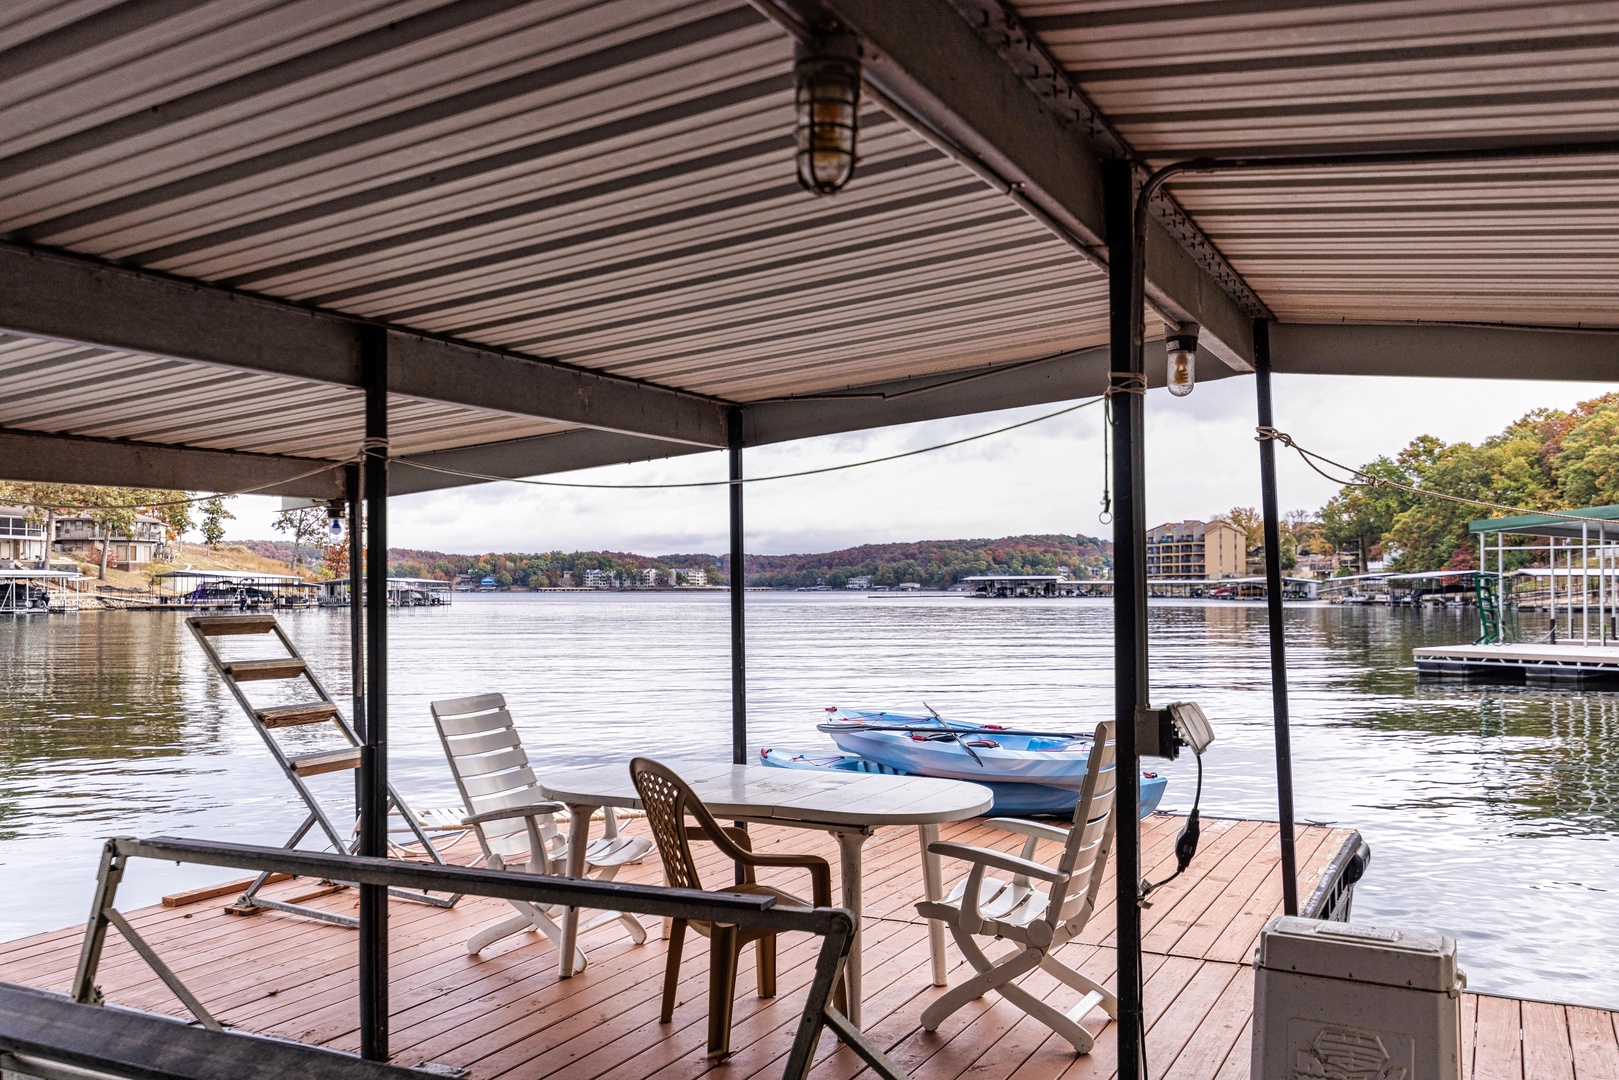 The dock is ideal for enjoying a bite or an evening beverage on the water